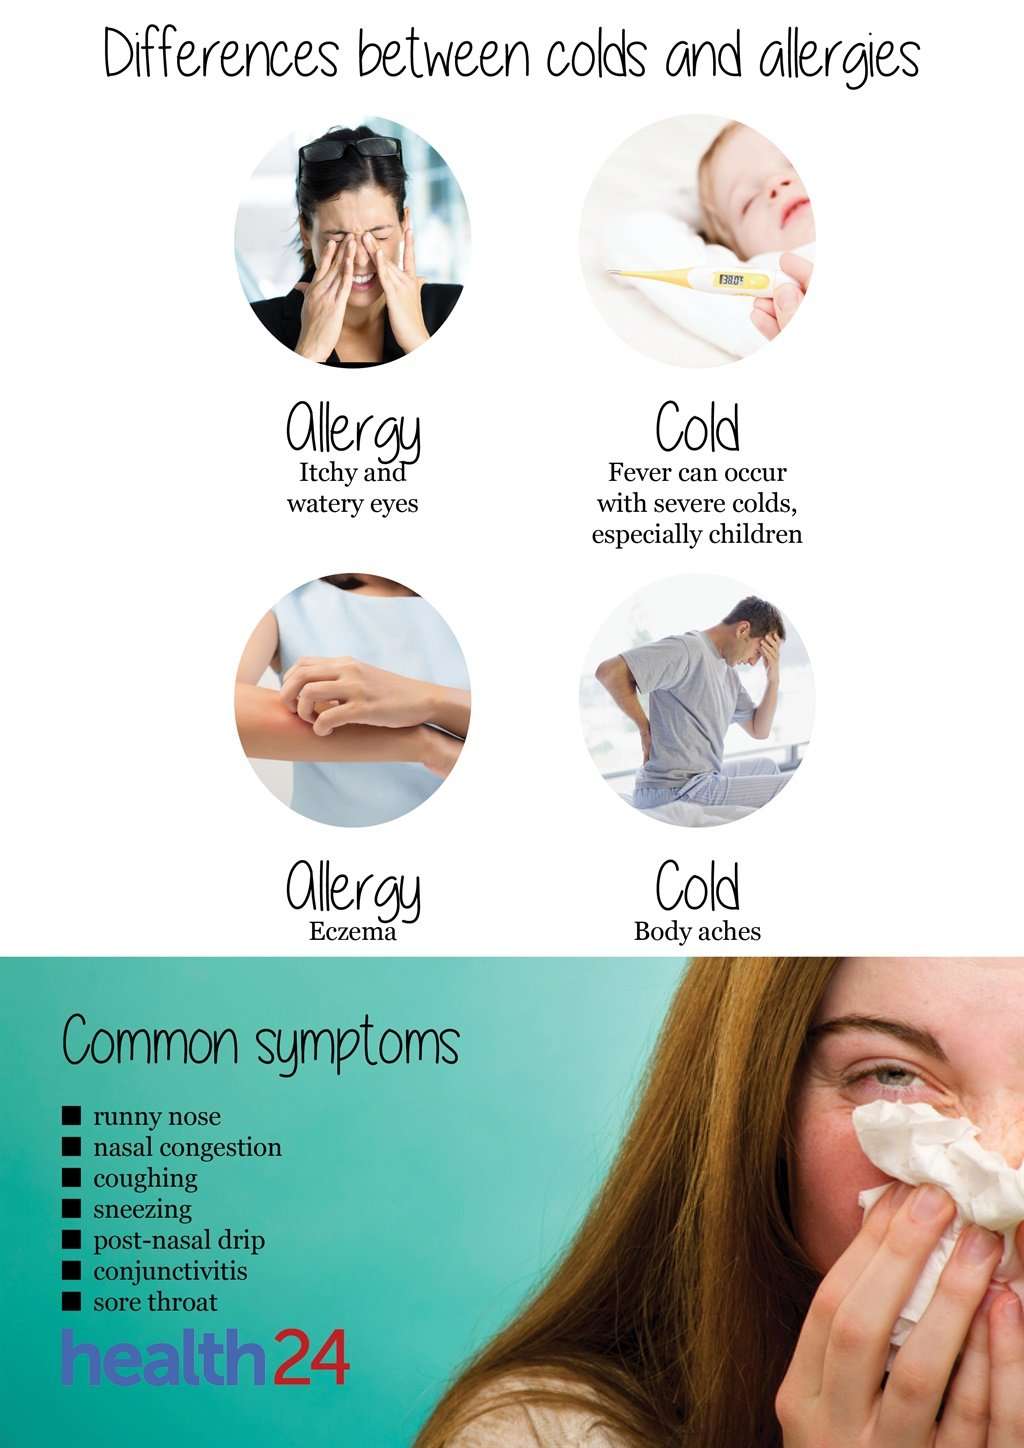 Is it a cold or an allergy?